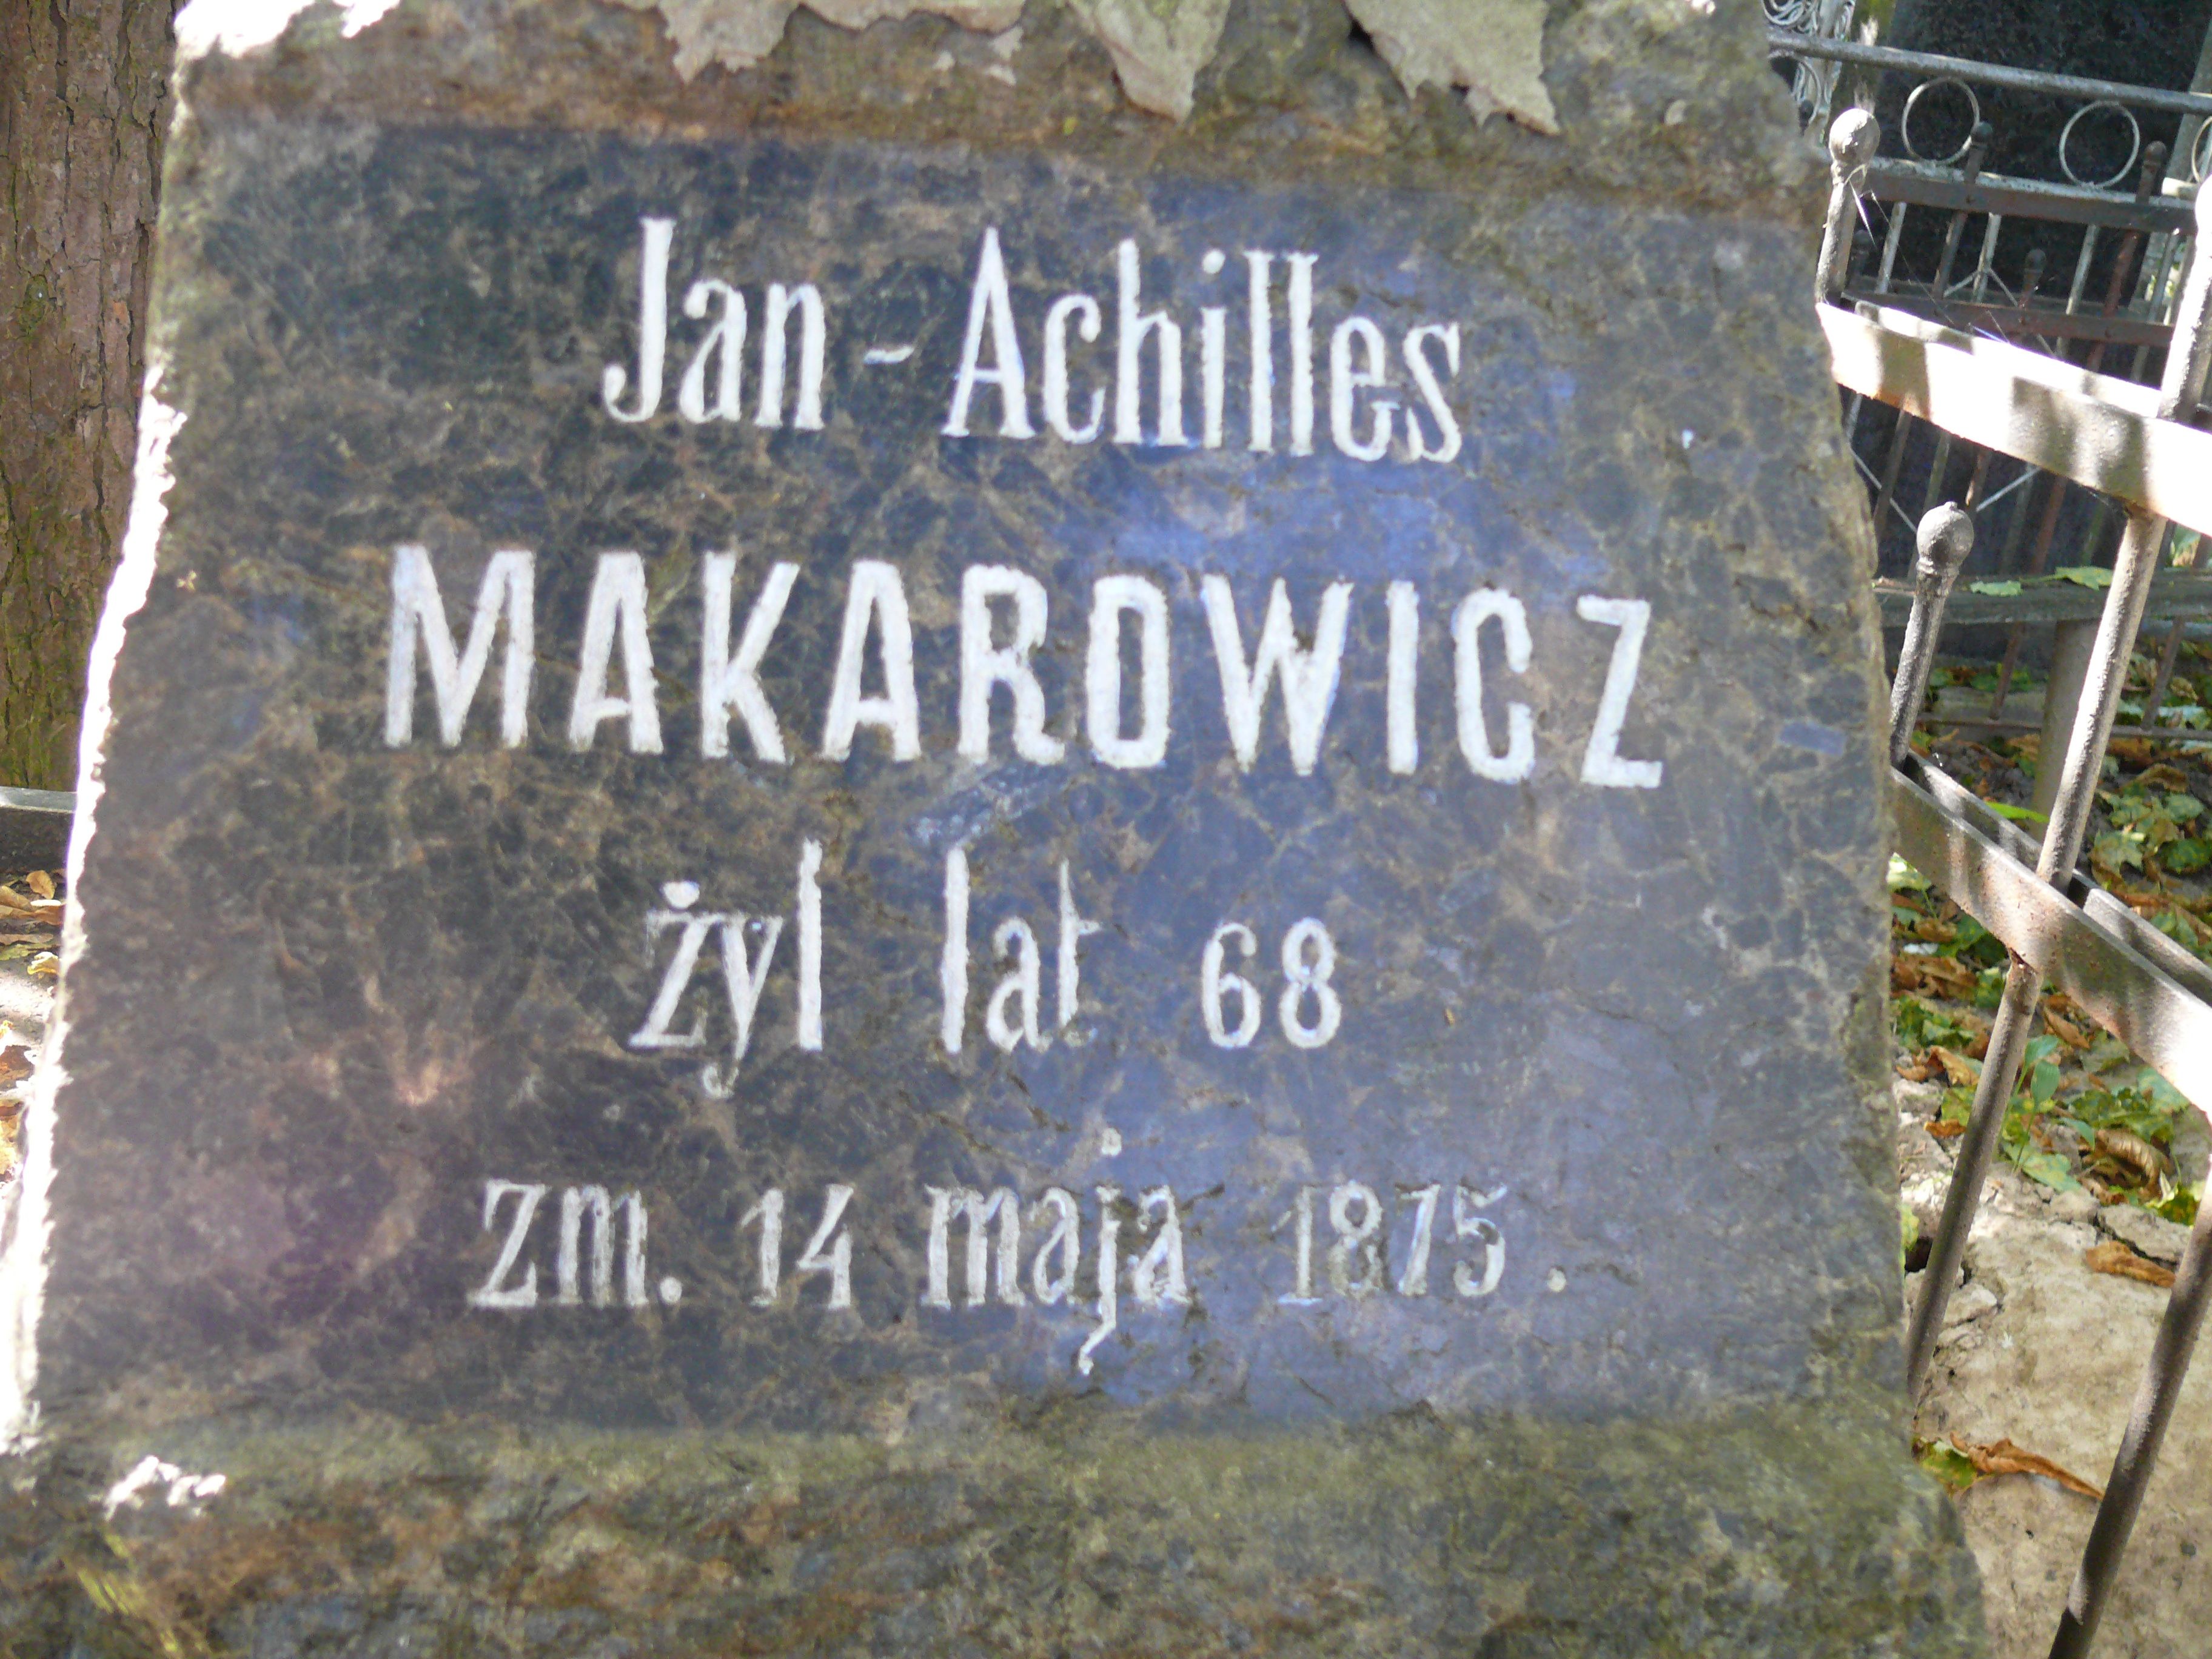 Inscription from the tombstone of Jan Makarowicz